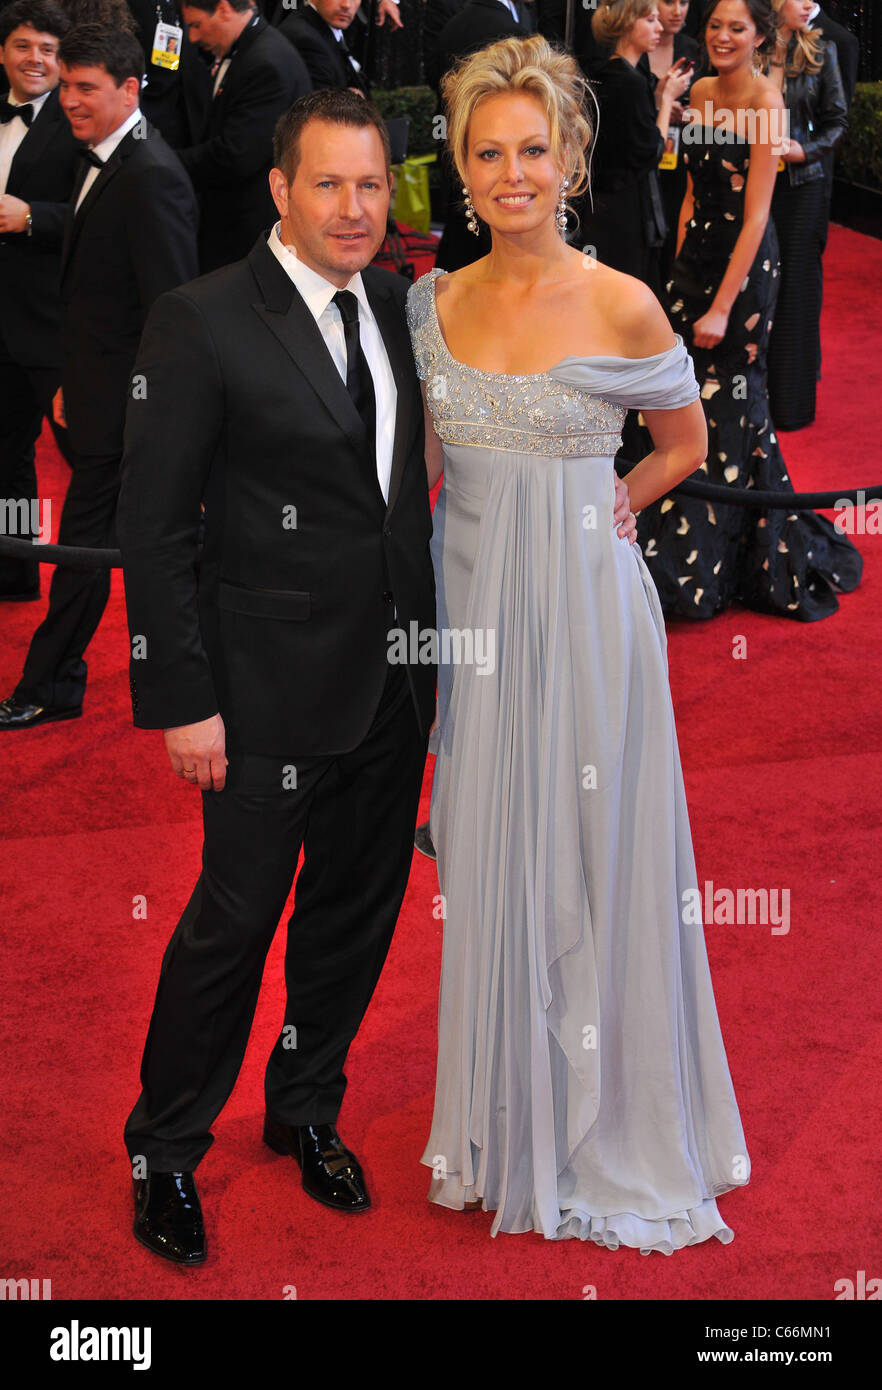 Brian Oliver (Producer of Black Swan), at for The 83rd Academy Awards Oscars